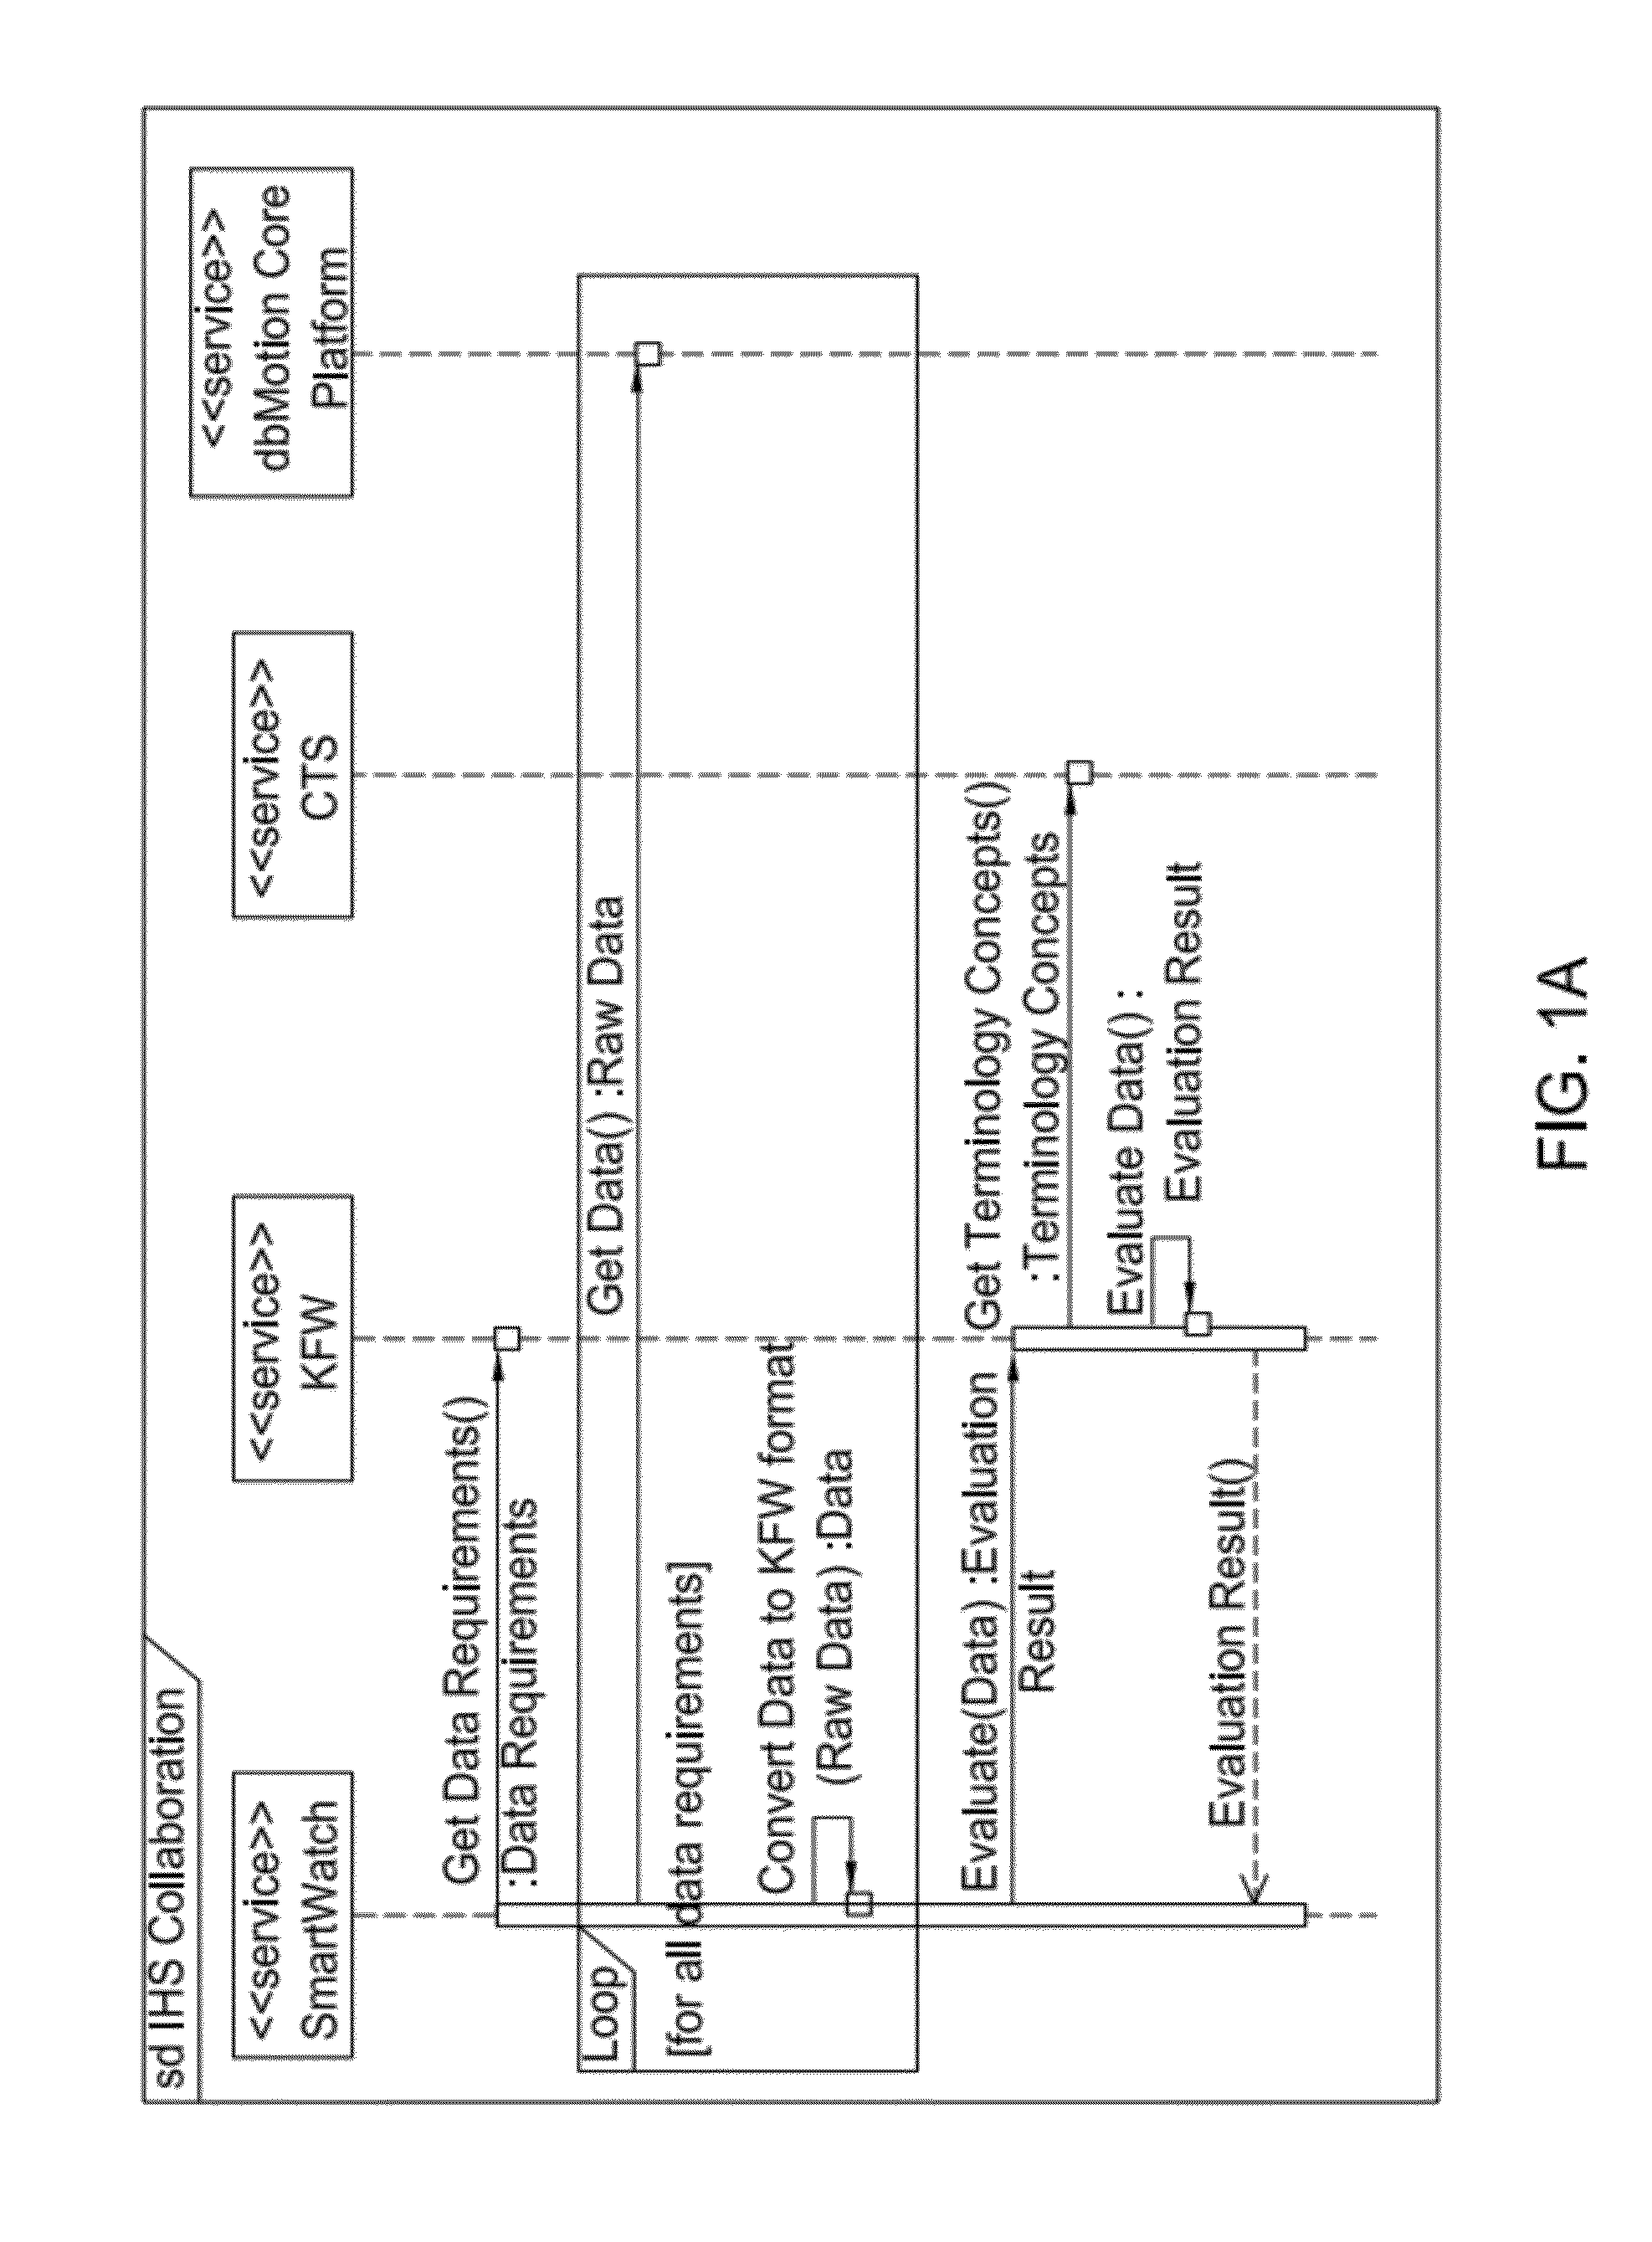 System and methods for facilitating computerized interactions with emrs